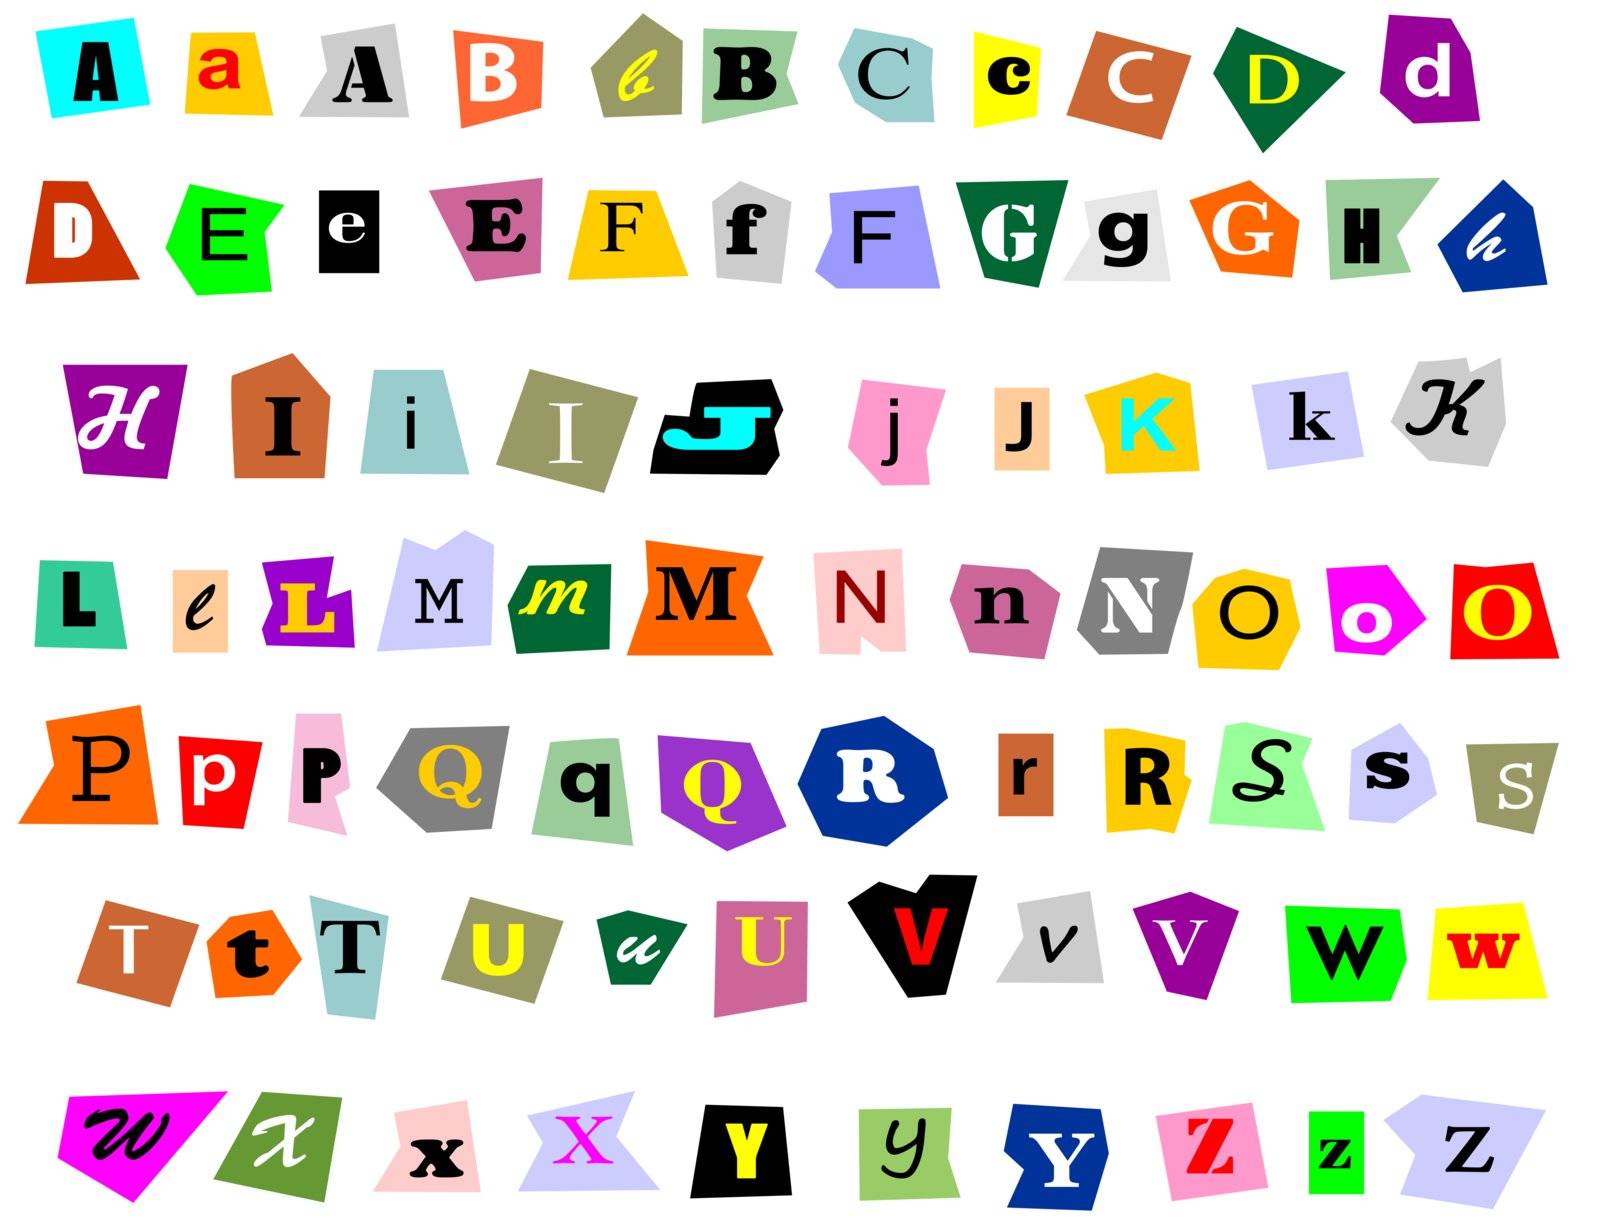 Alphabet newspaper uppercase, lowercase and symbols cutouts isolated on white. Mix and match to make your own words.